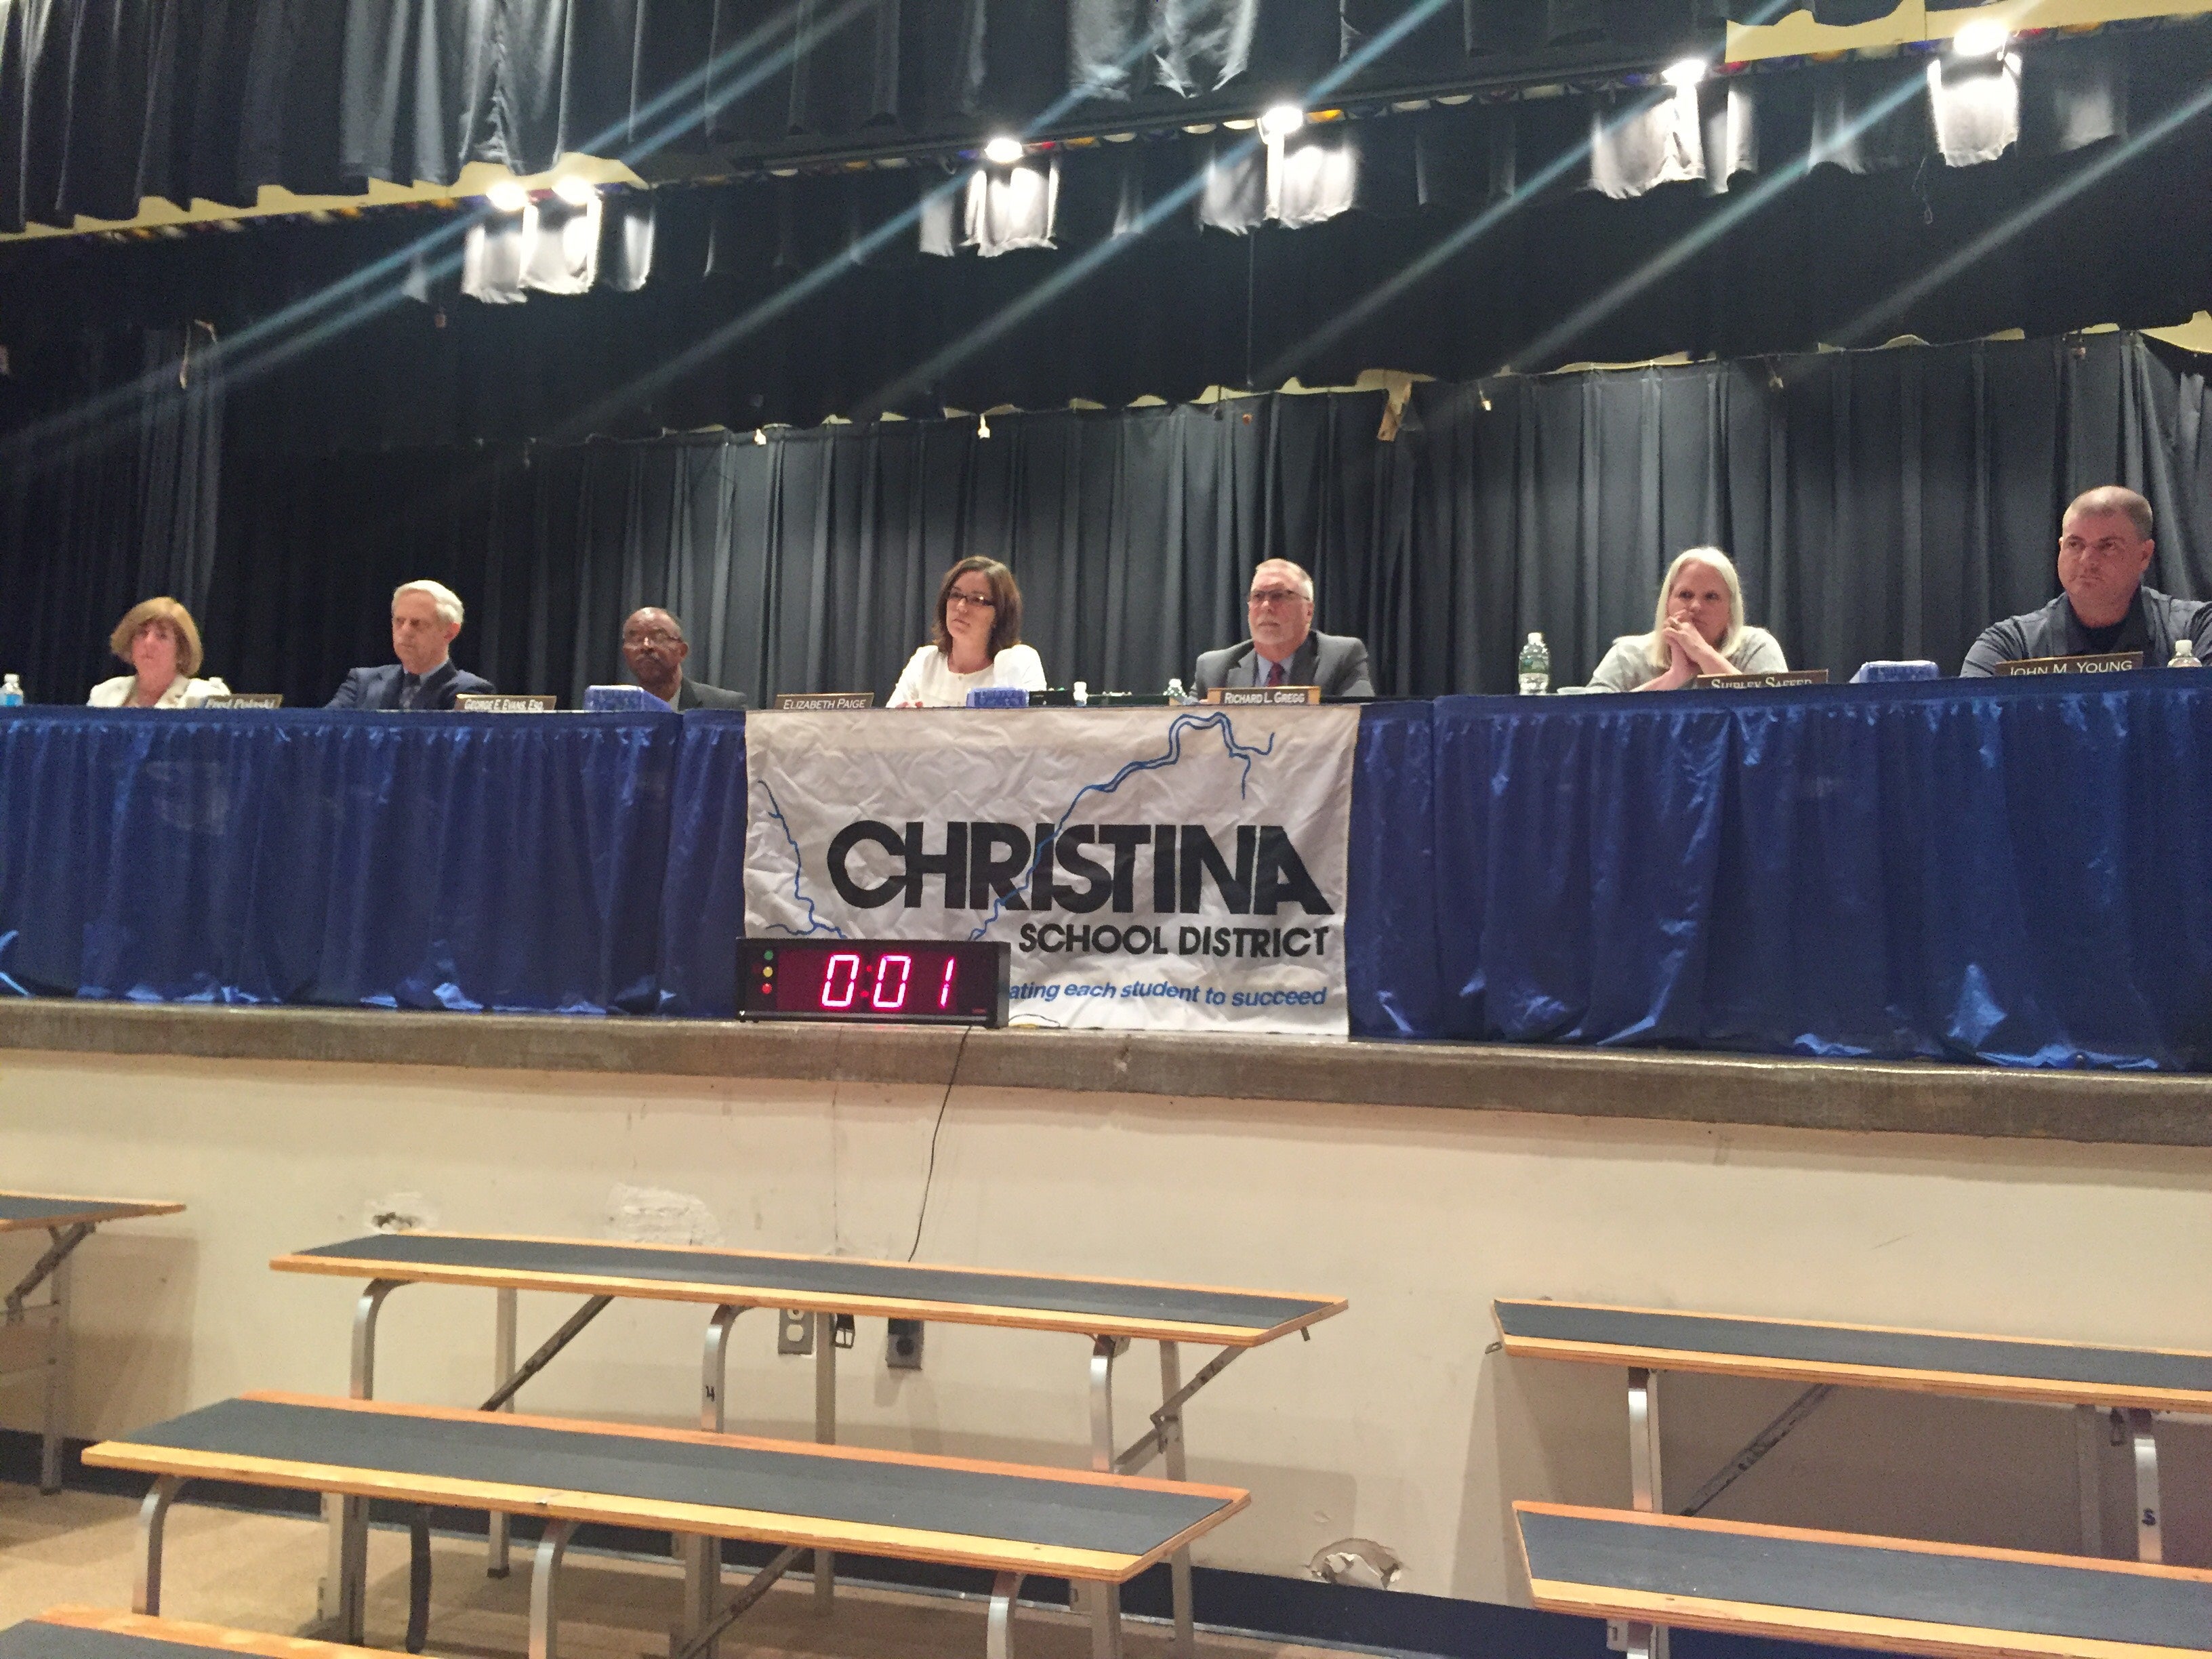  Christina School District, the largest in Delaware, had 1.1 percent and 1.2 percent turnout, respectively, for its two contested school board races Tuesday. (Cris Barrish/WHYY) 